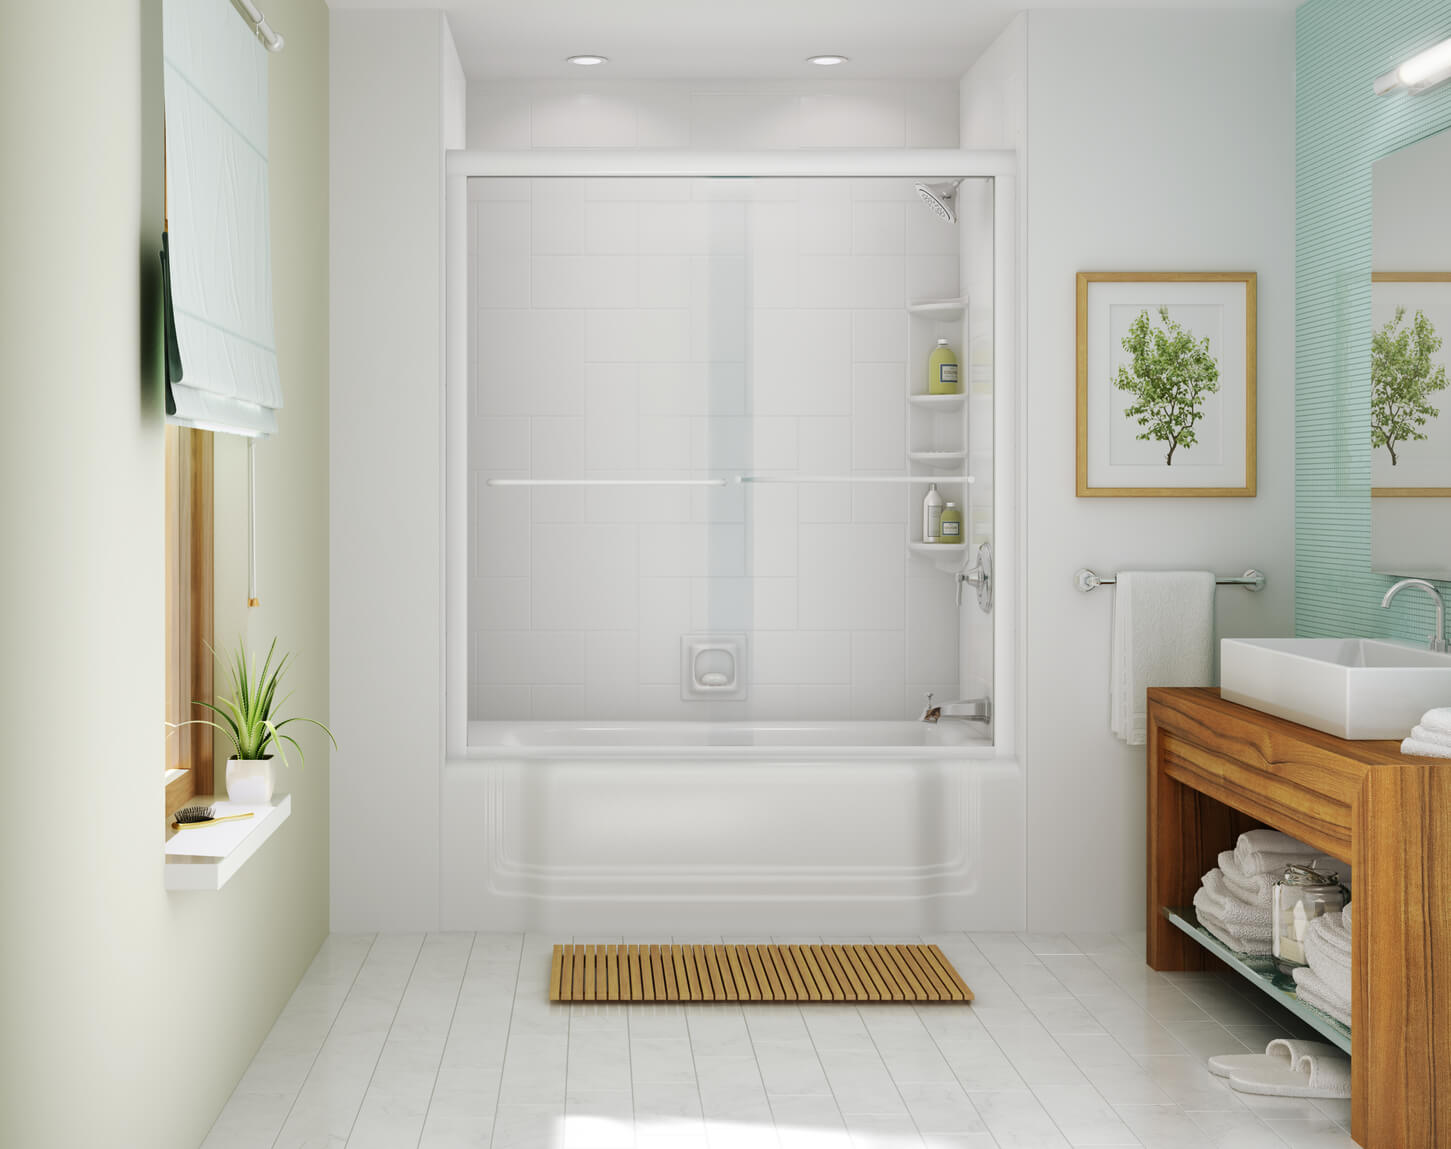 Creating Spa Bathrooms With The Latest Wellness Design And Technology Trends